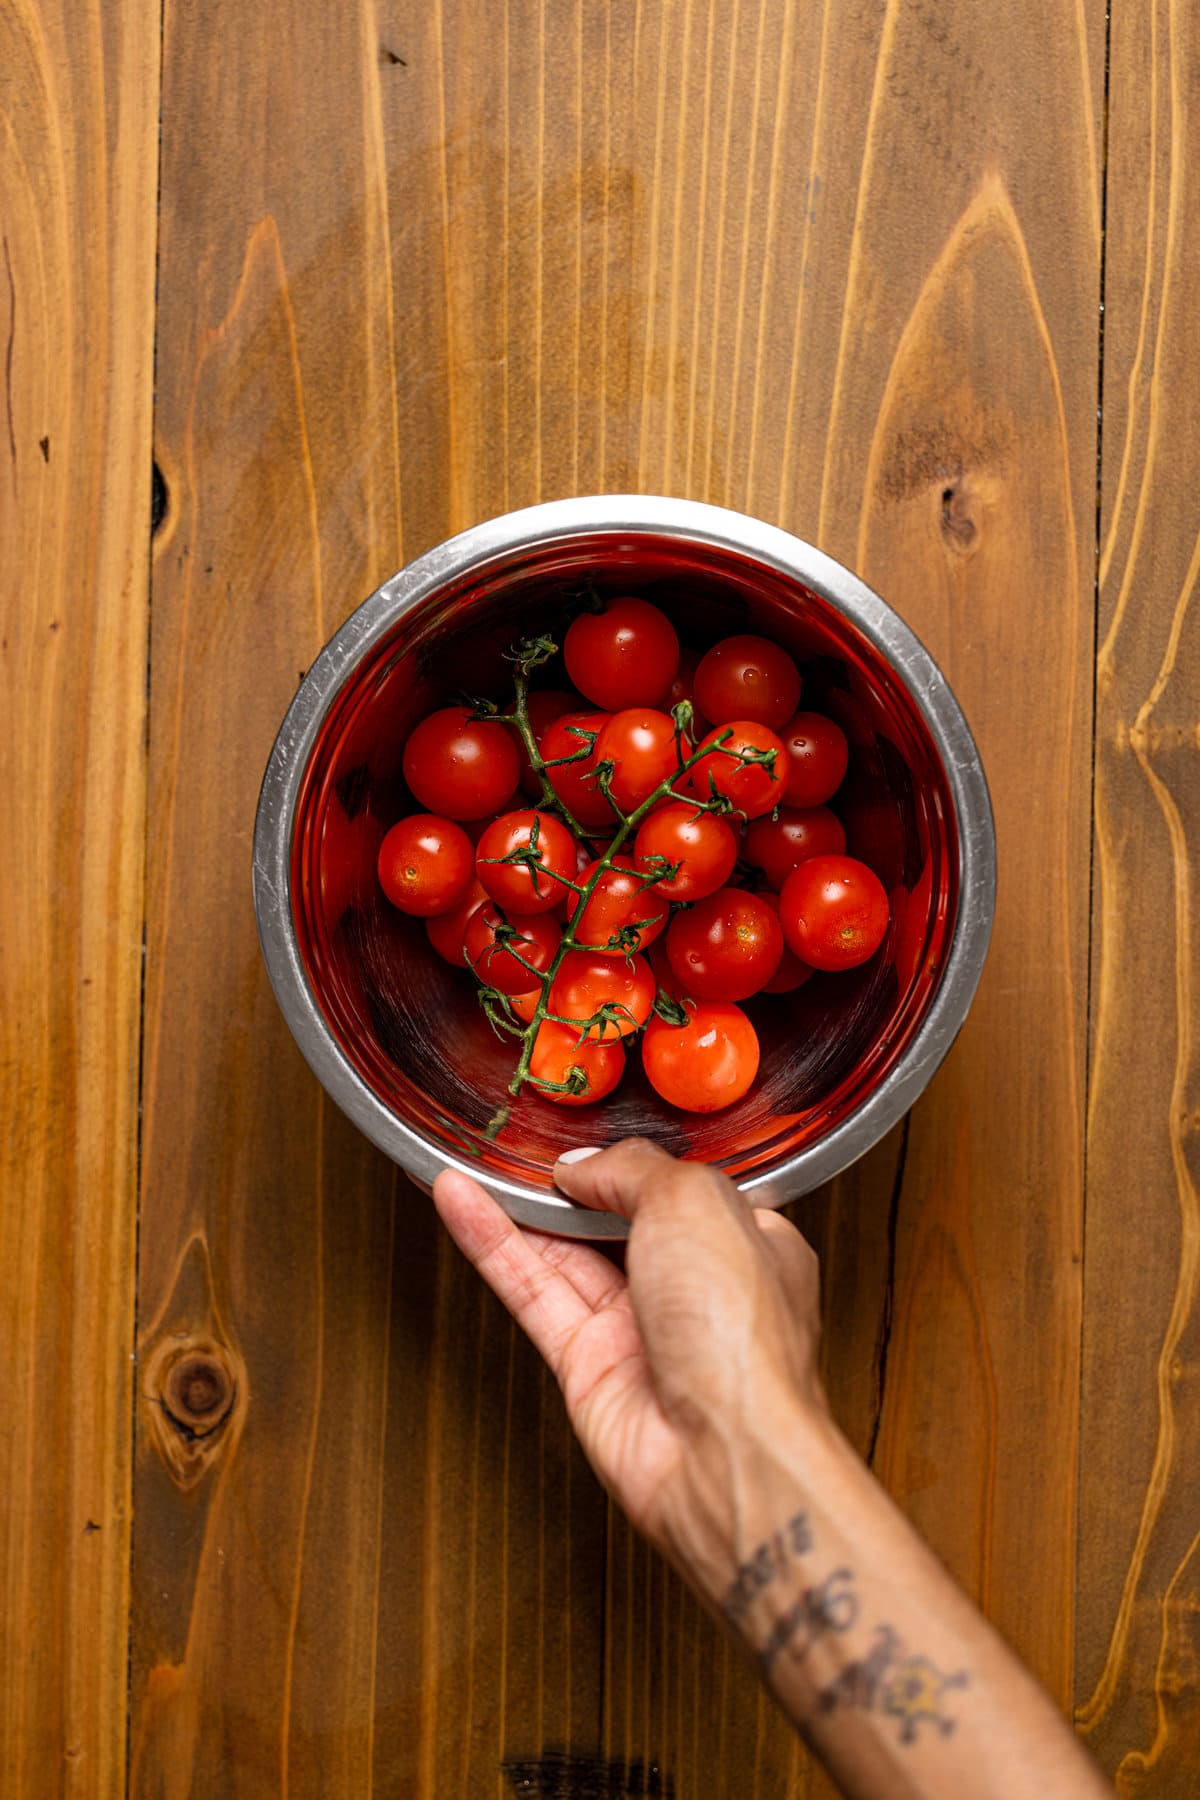 Hand holding a bowl of tomatoes